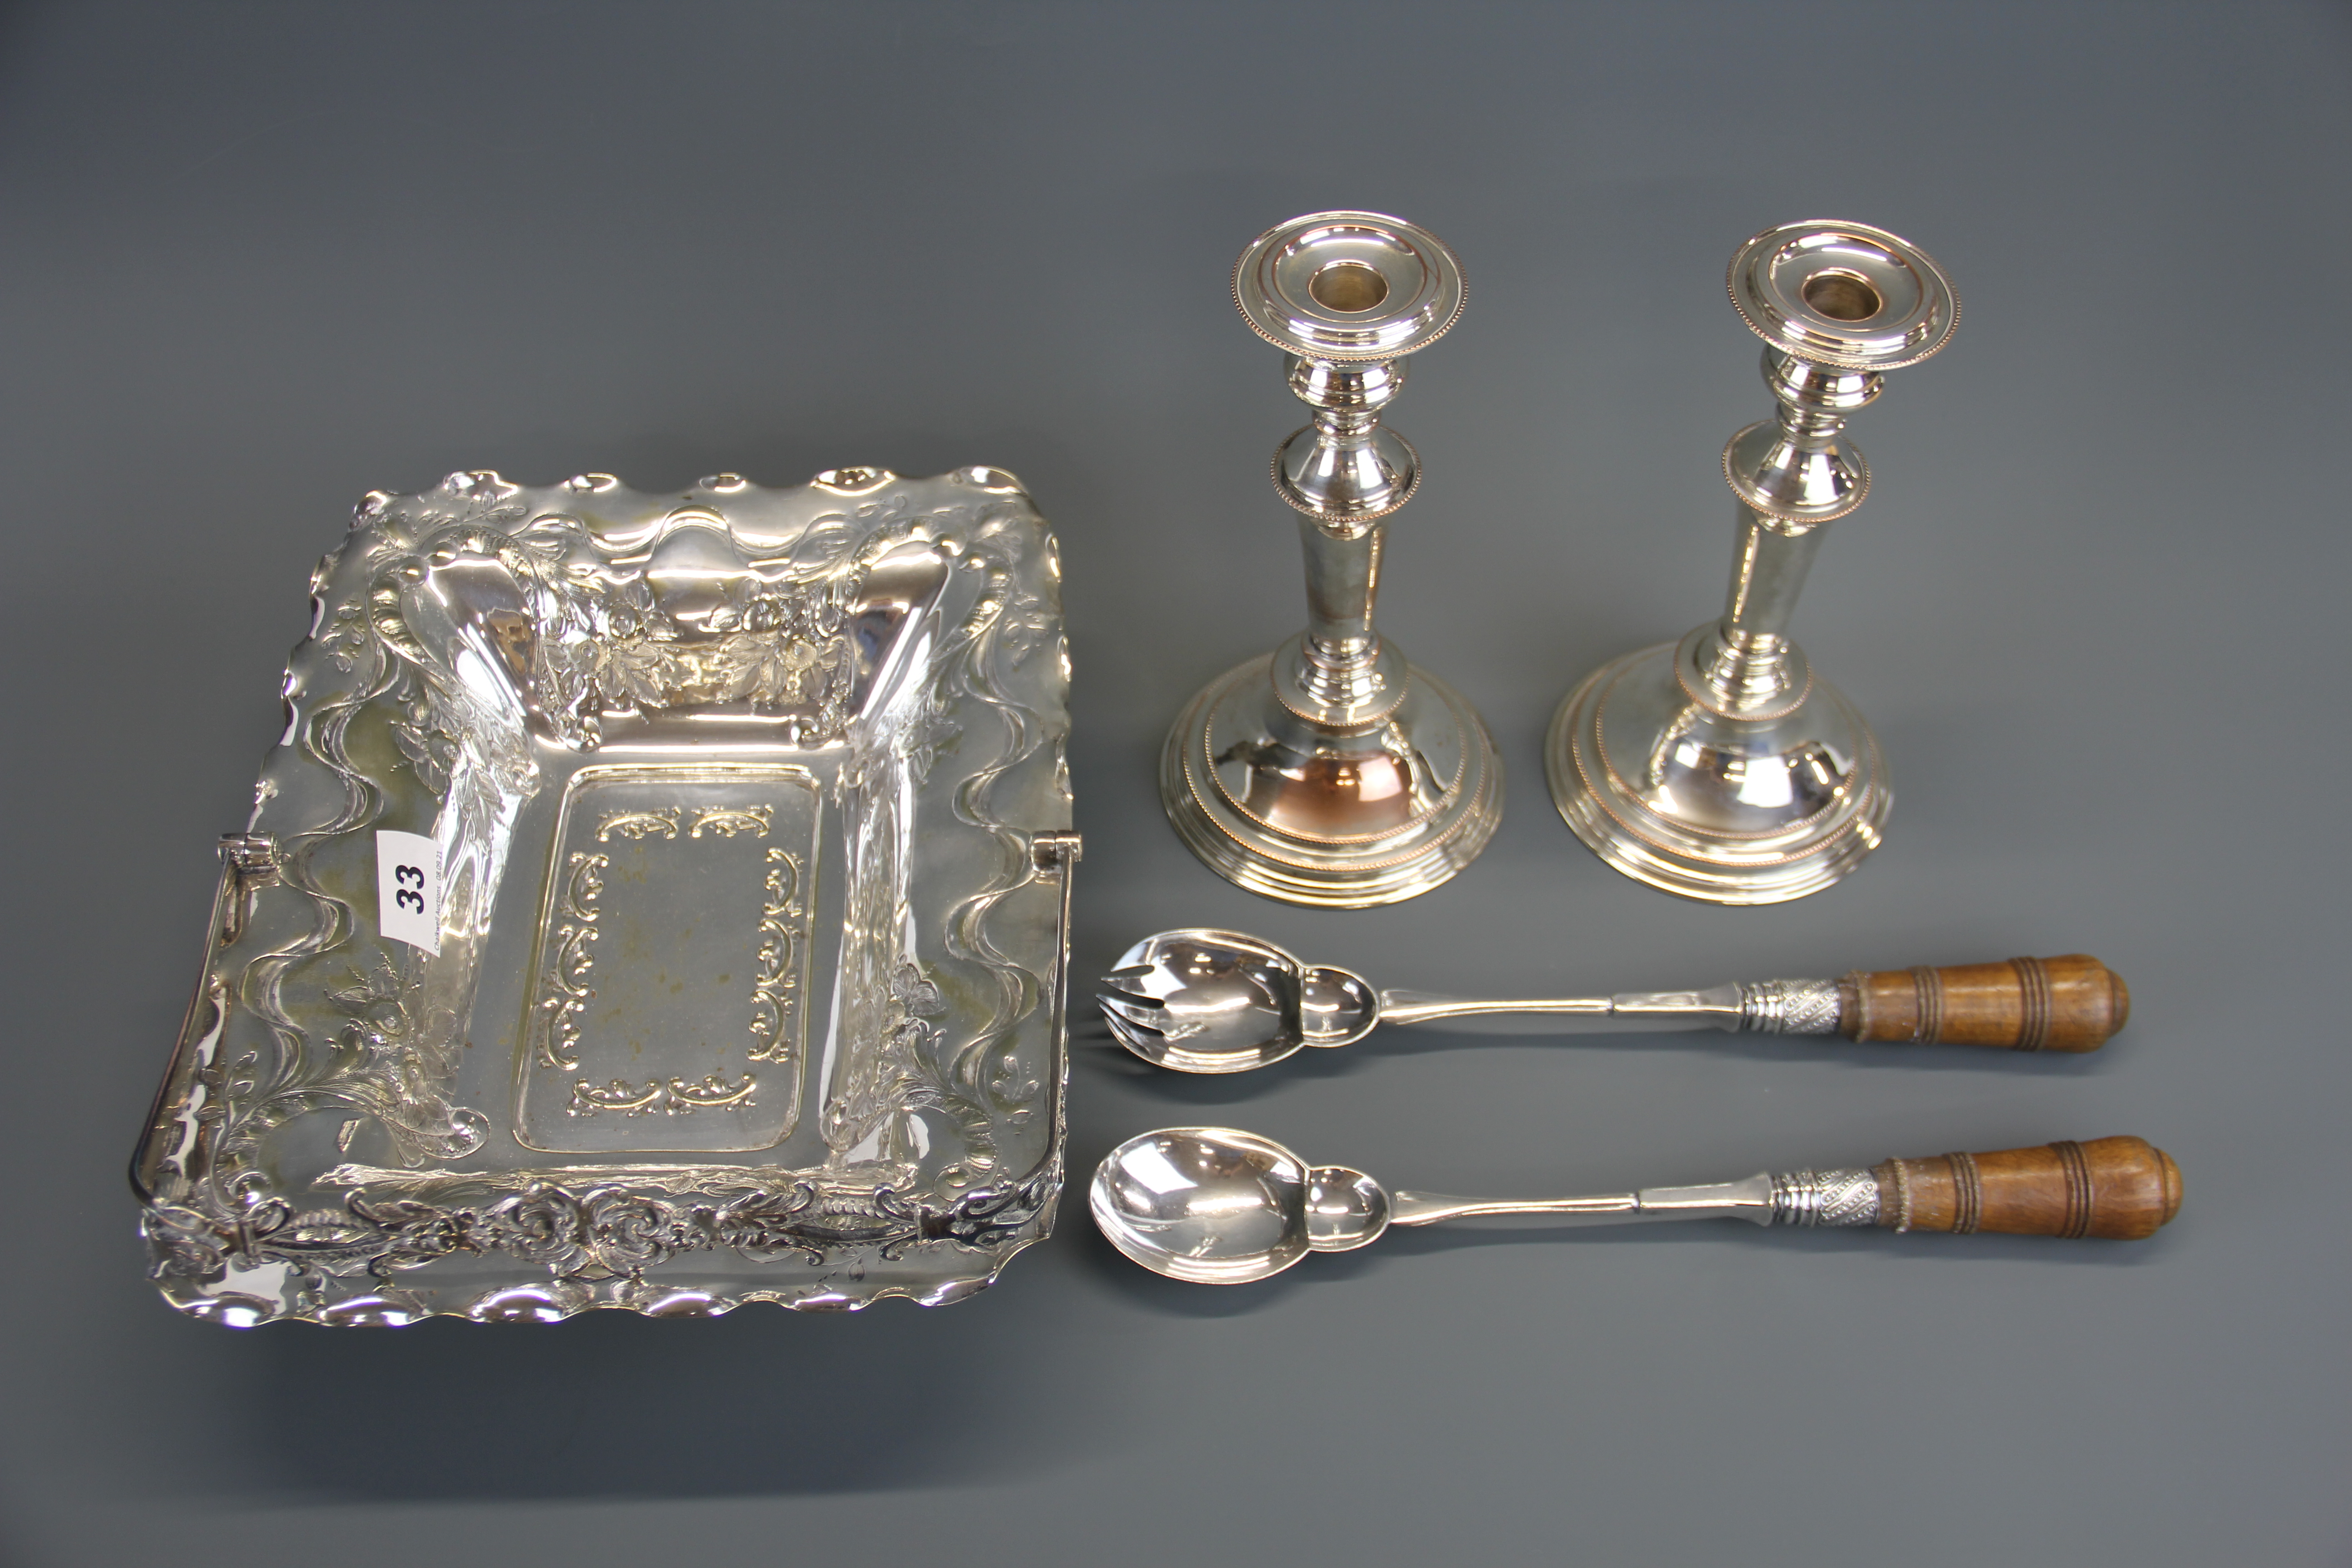 A Victorian hammered silver plated fruit basket with a pair of salad servers and a pair of silver